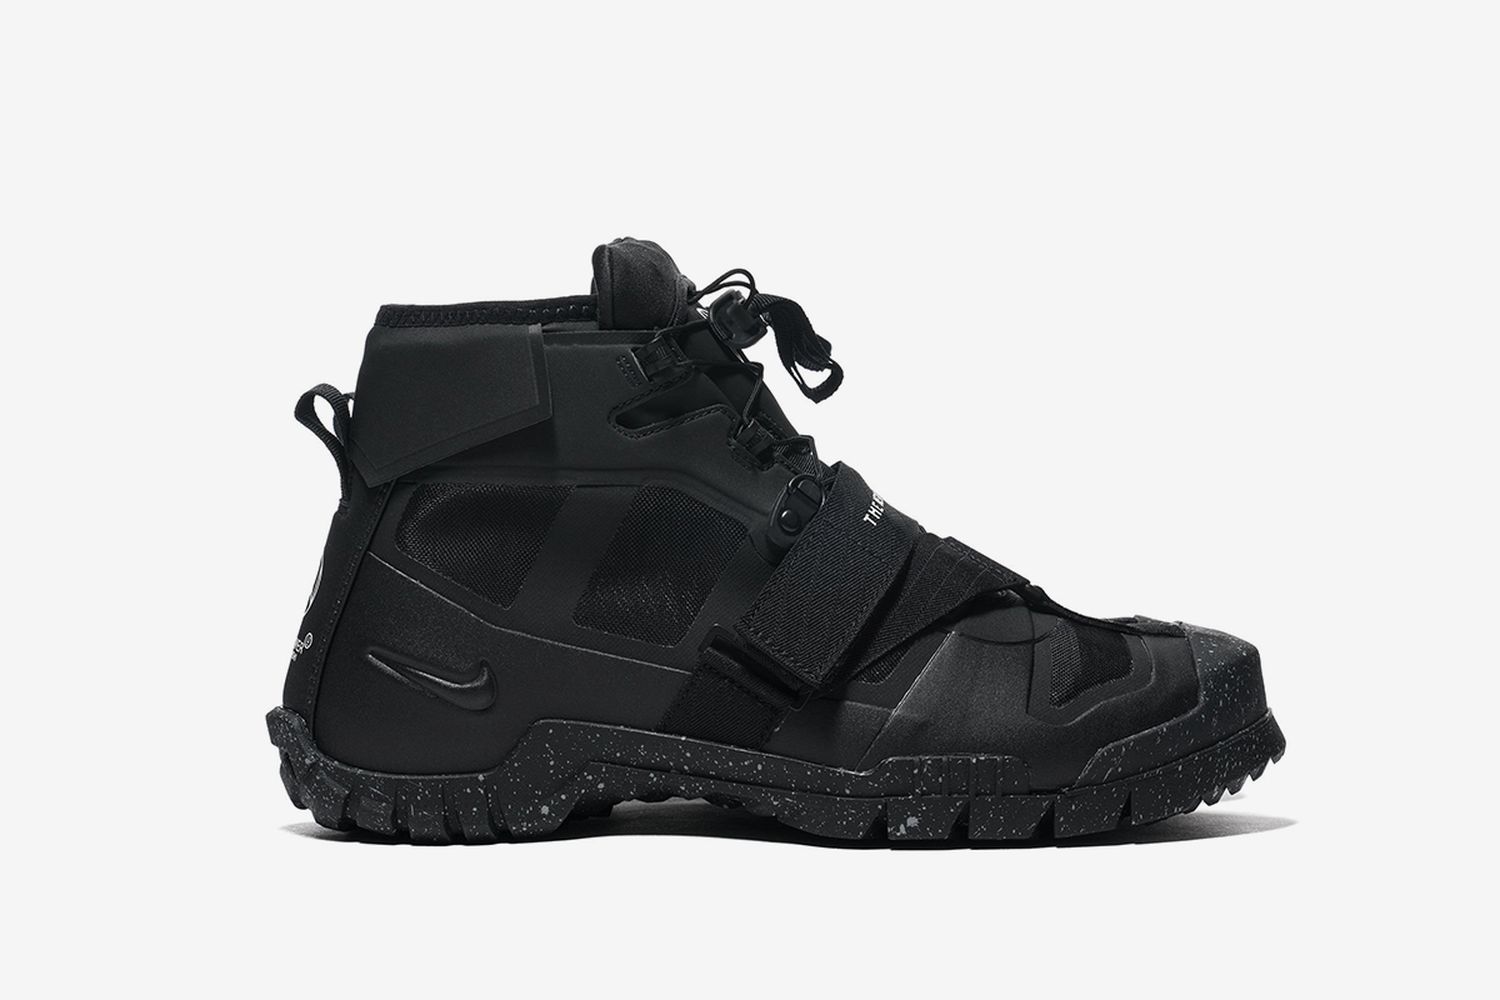 Cop Our Fashion Director's Top Sneakers on Farfetch Right Now